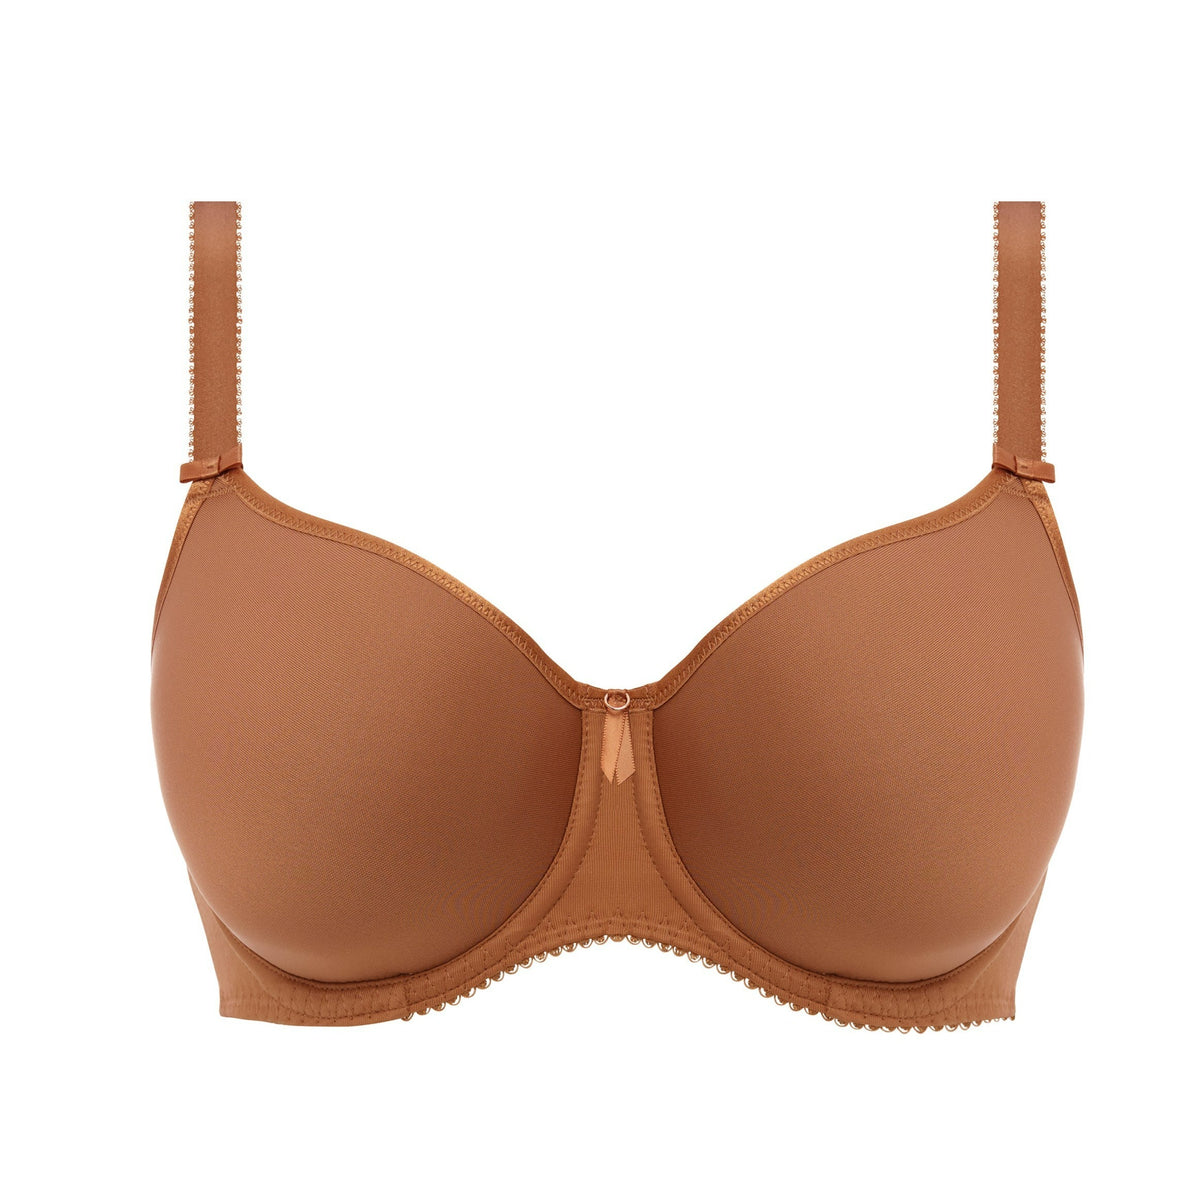 The Sims Resource - Cassie Lingerie Bra